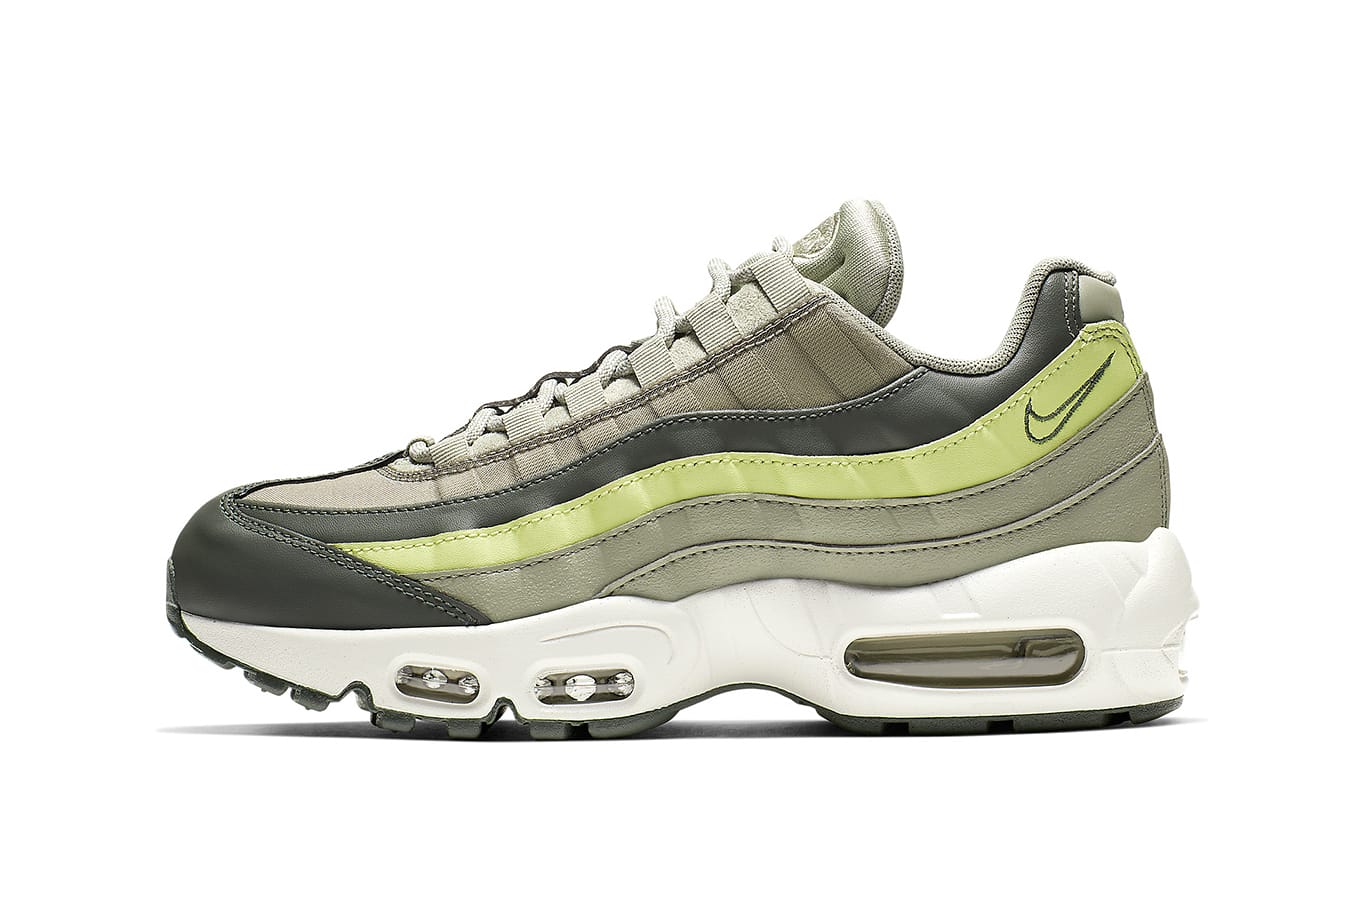 Nike to Release Air Max 95 in Mineral Spruce | HYPEBAE